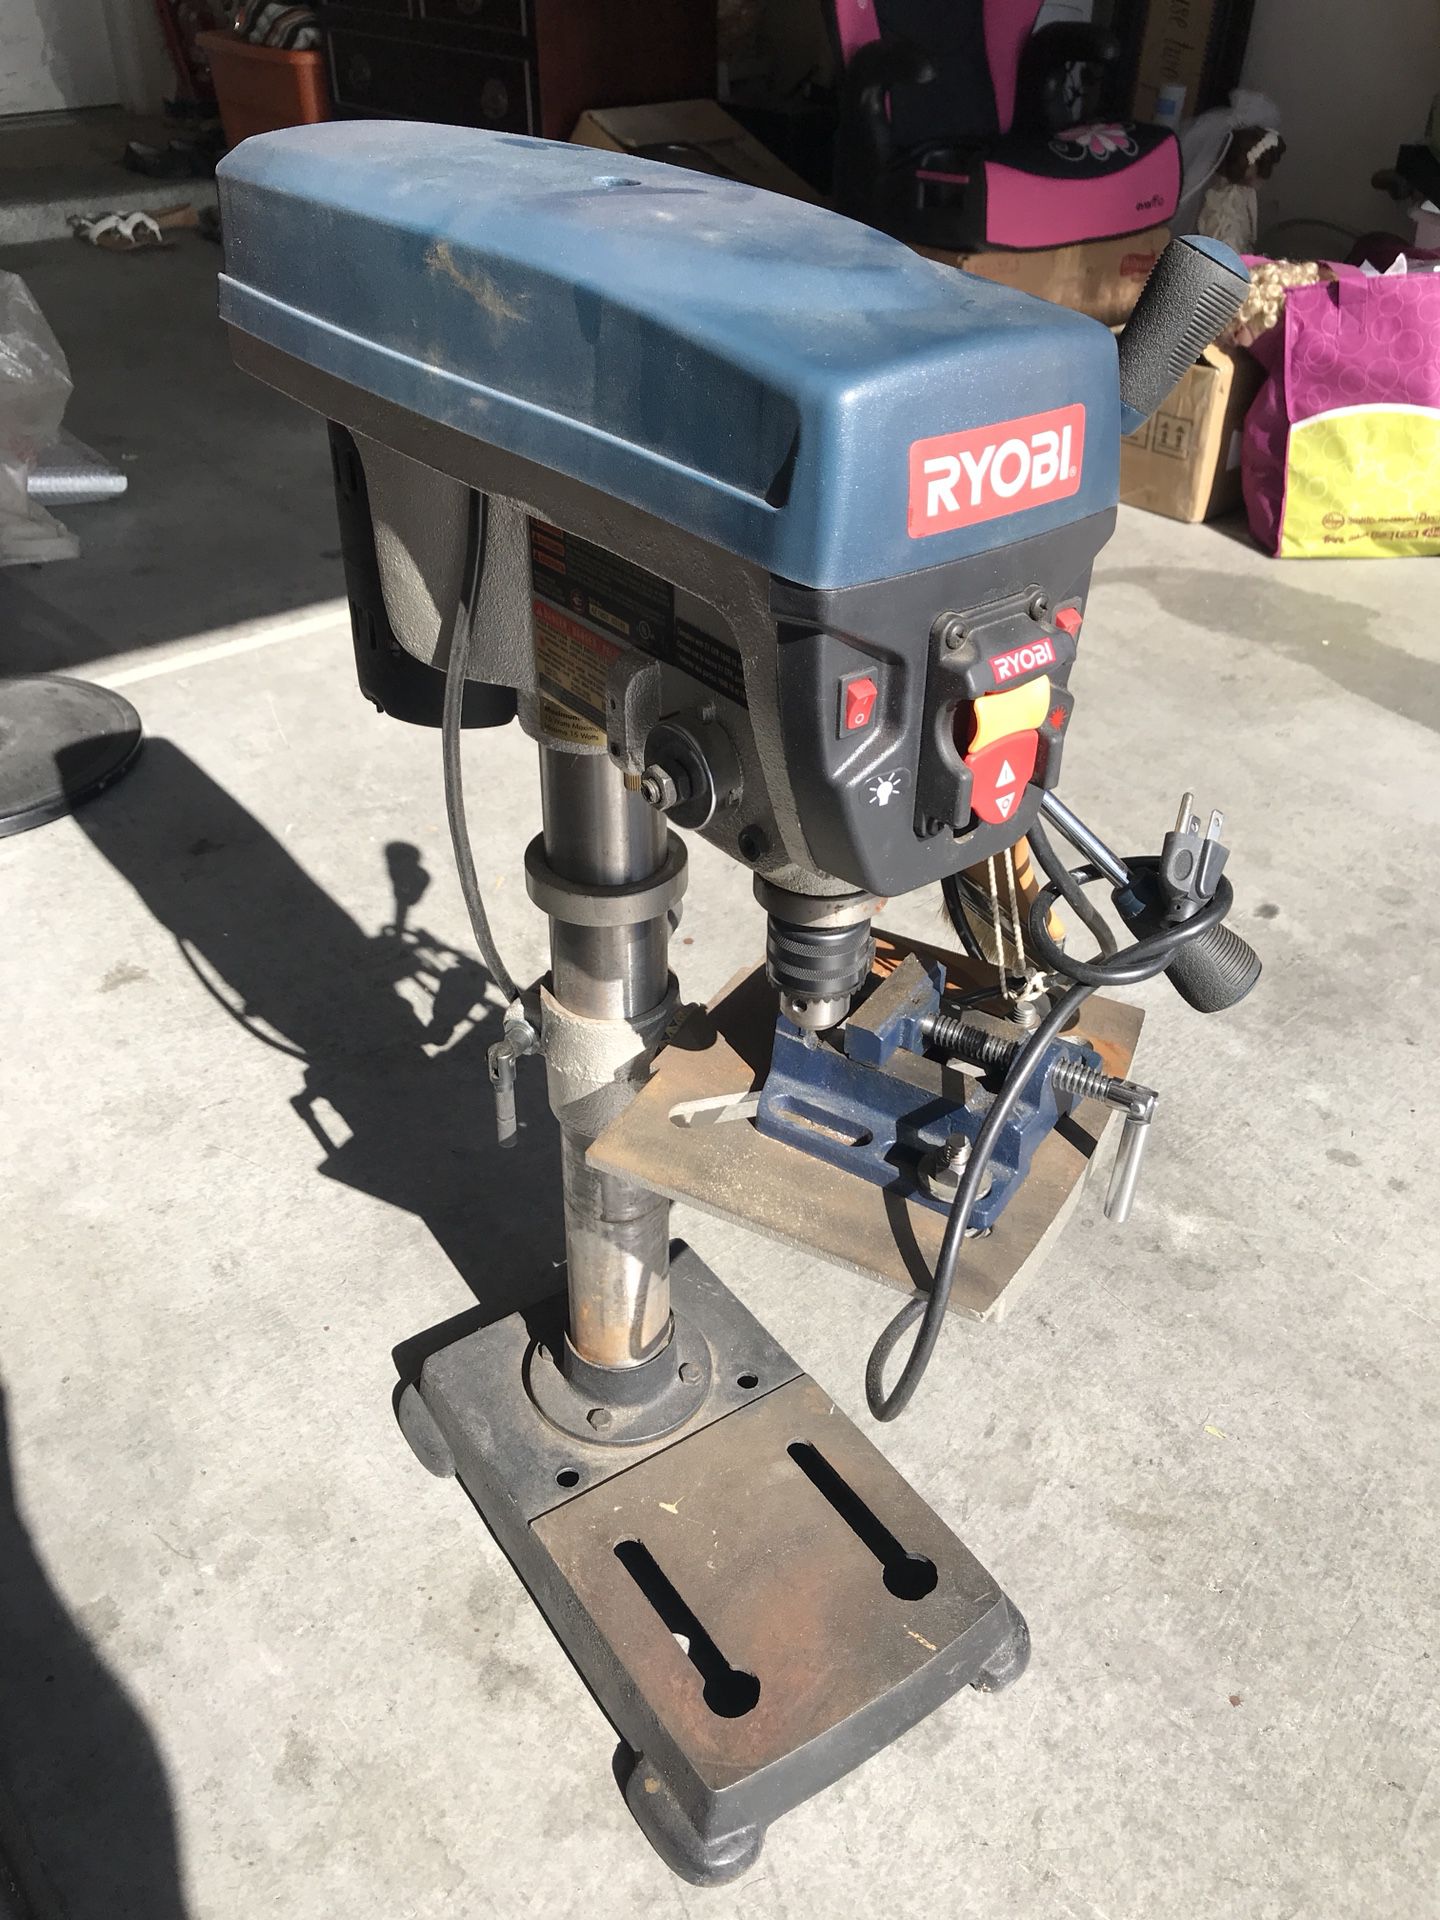 DP102L 10” Drill Press Laser Guide vice for in Las Vegas, NV - OfferUp